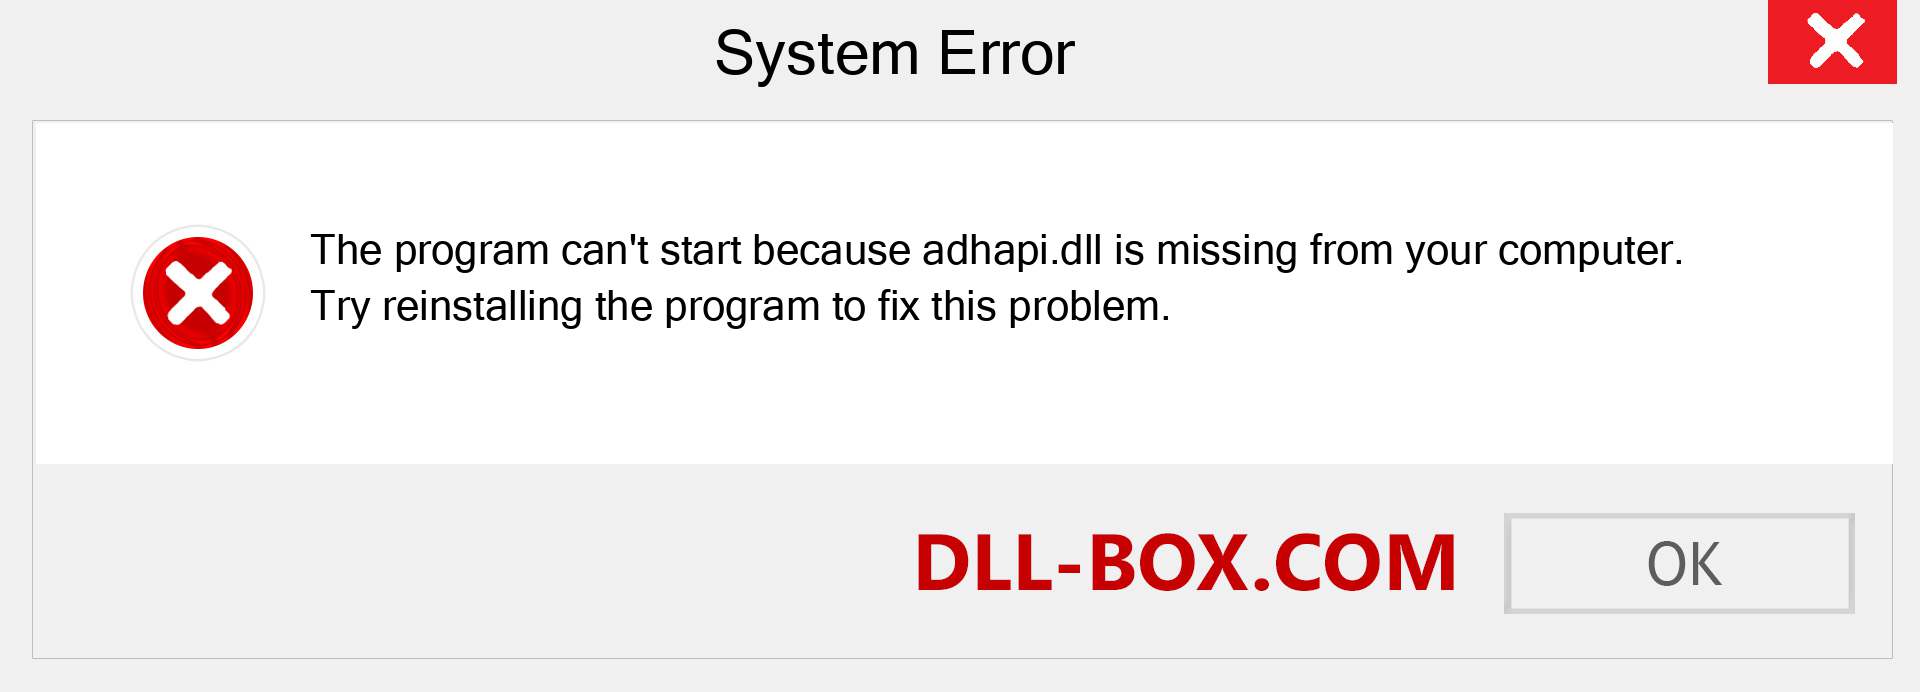  adhapi.dll file is missing?. Download for Windows 7, 8, 10 - Fix  adhapi dll Missing Error on Windows, photos, images